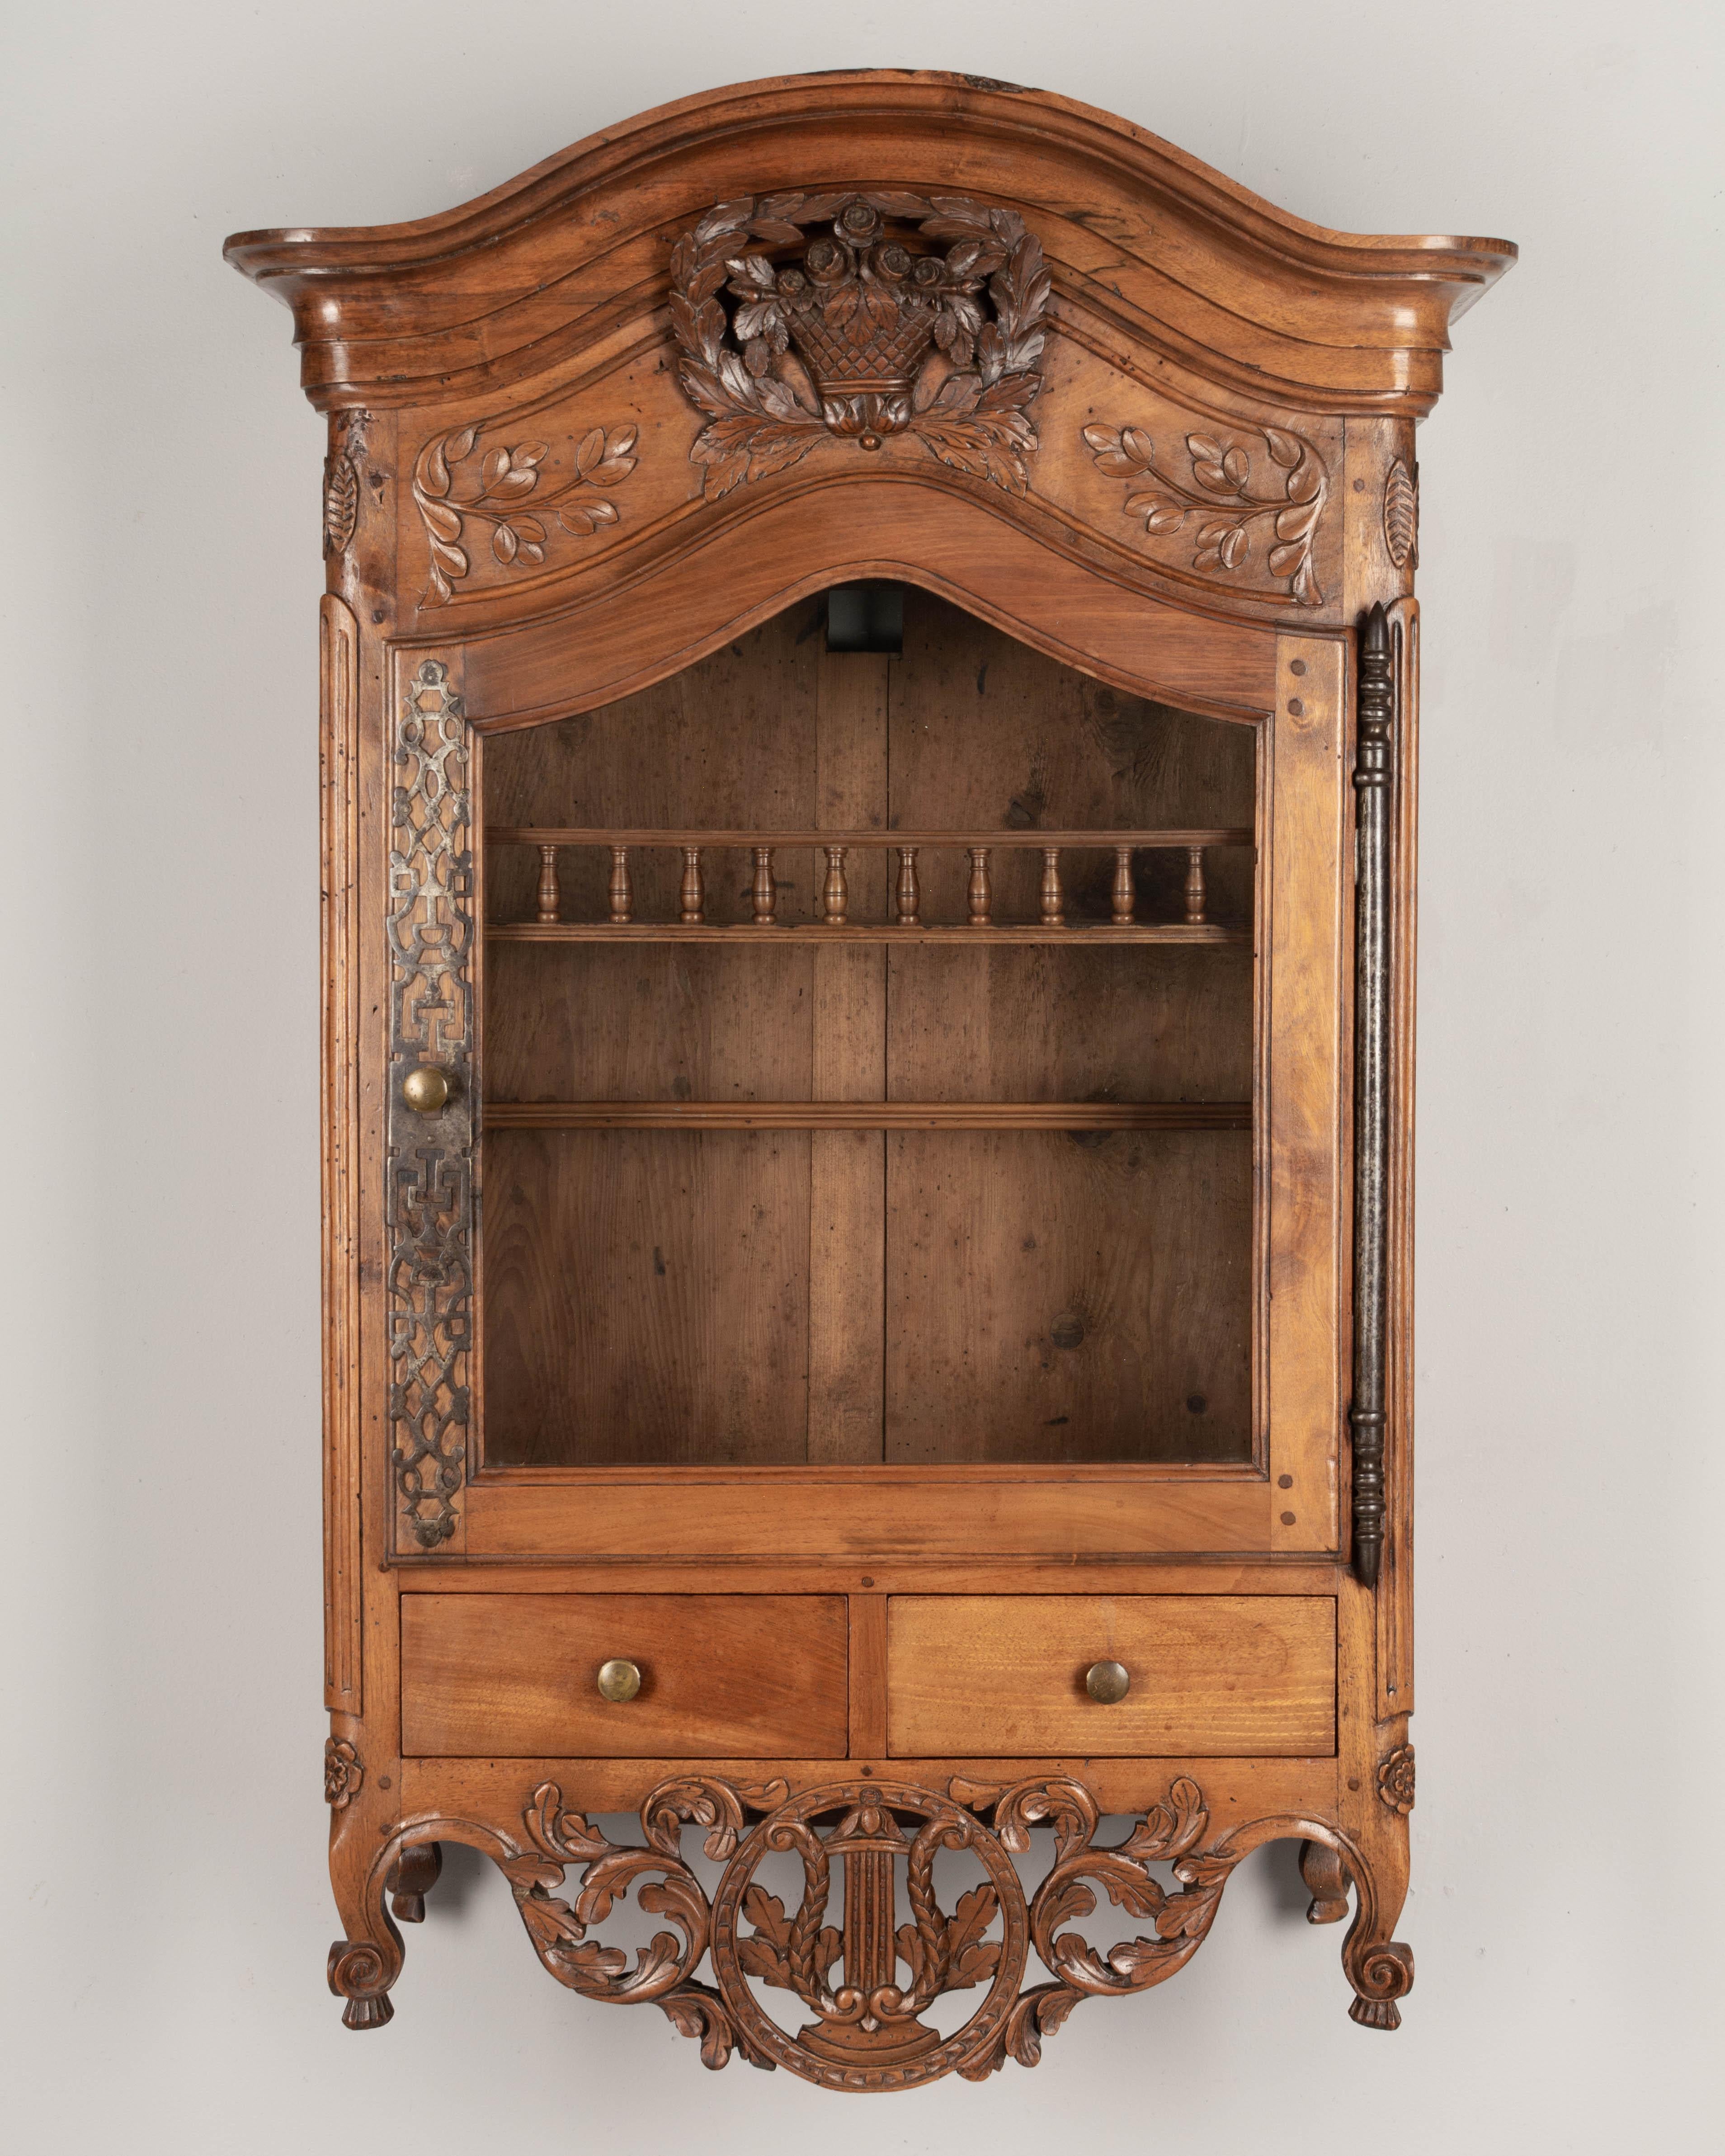 18th Century French Provencal Verrio or Wall Cabinet In Good Condition For Sale In Winter Park, FL